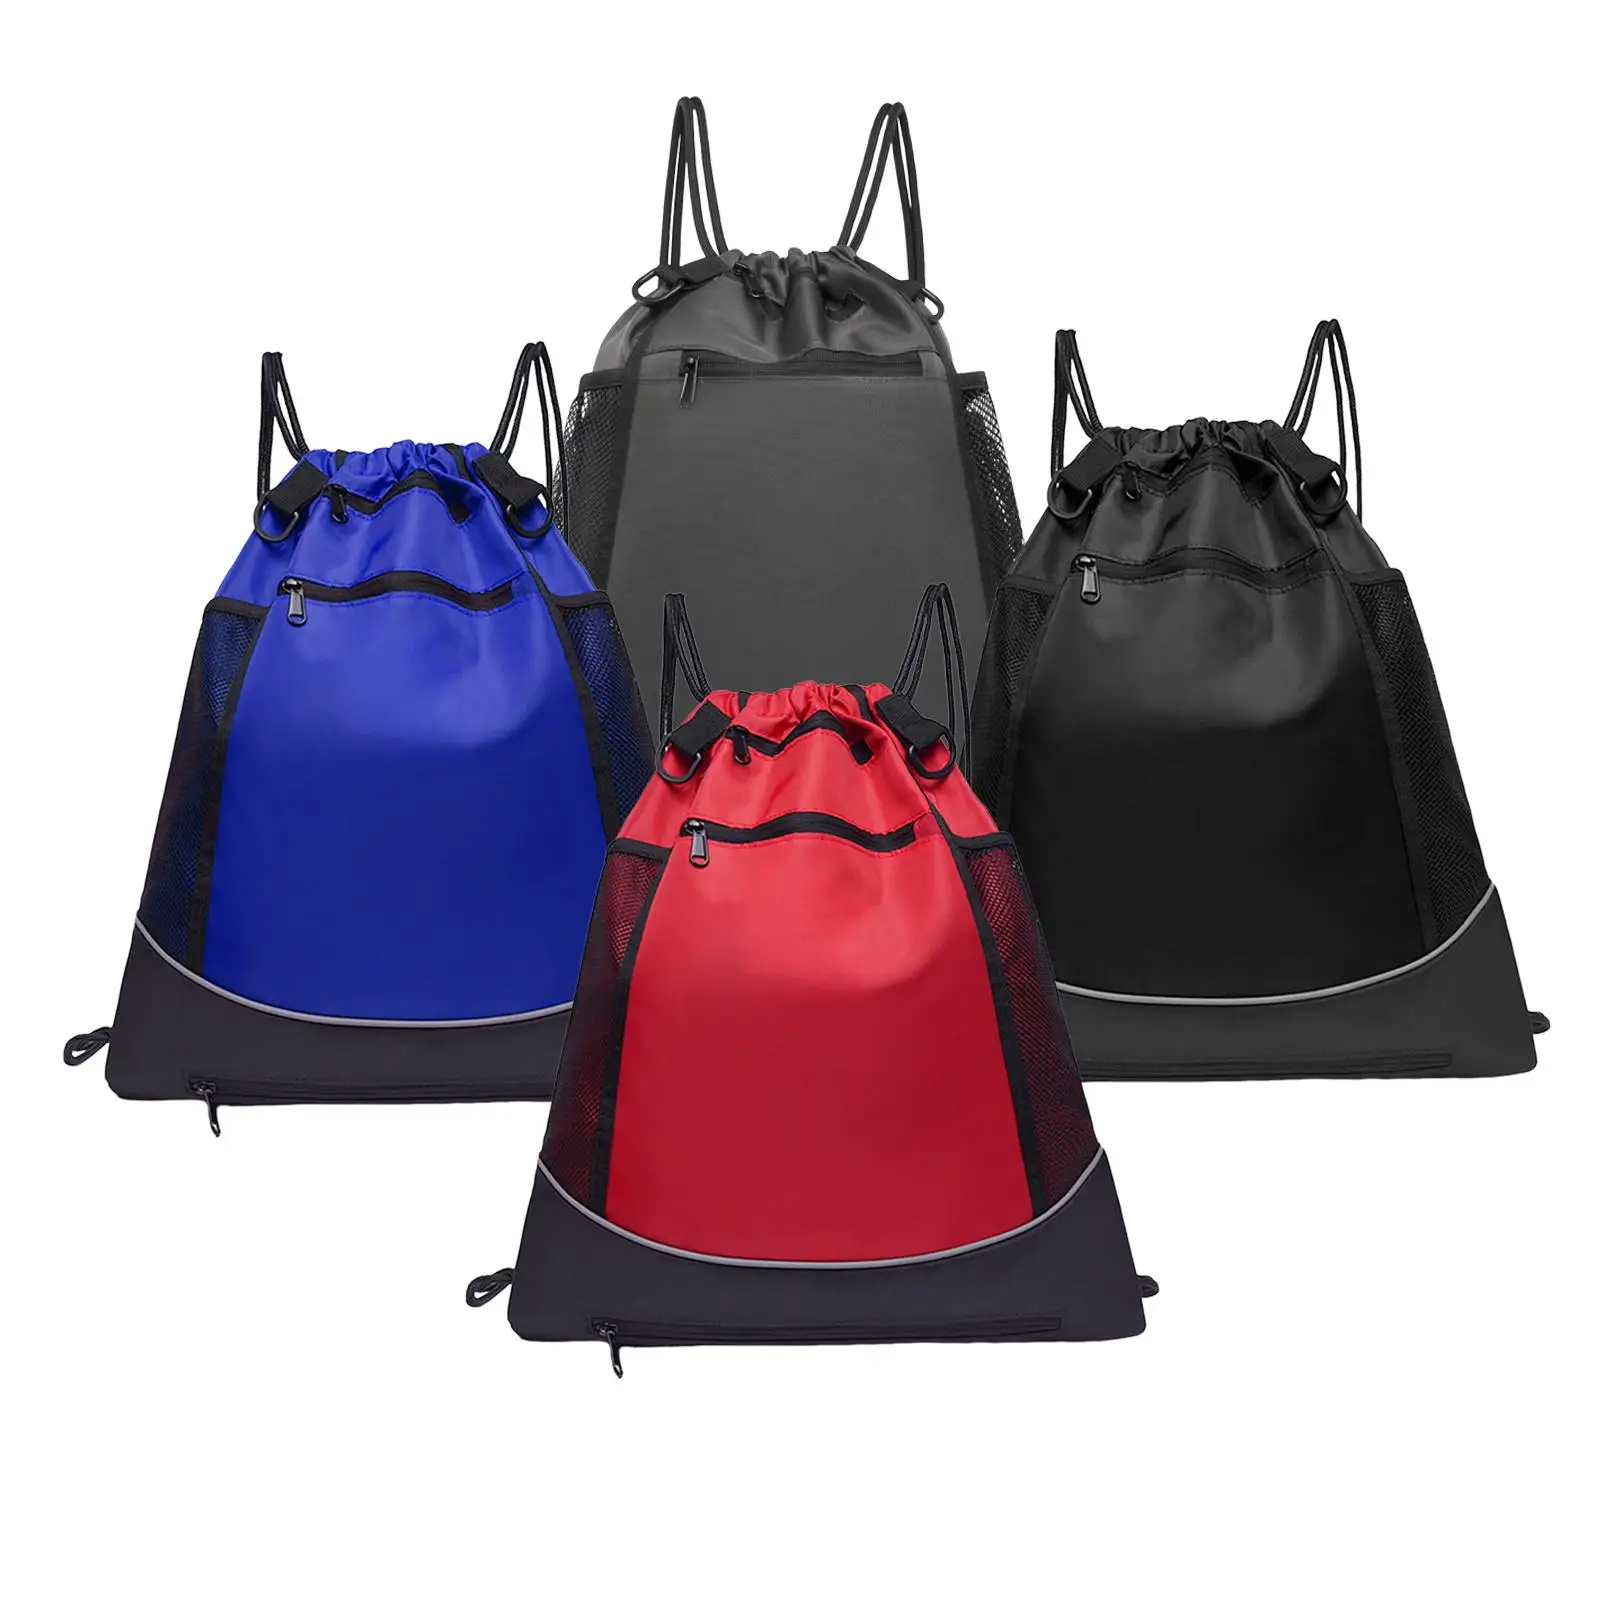 Basketball Bag Backpack with Ball Compartment, Unisex Waterproof Sports Bags for Football Soccer Volleyball Gym Team